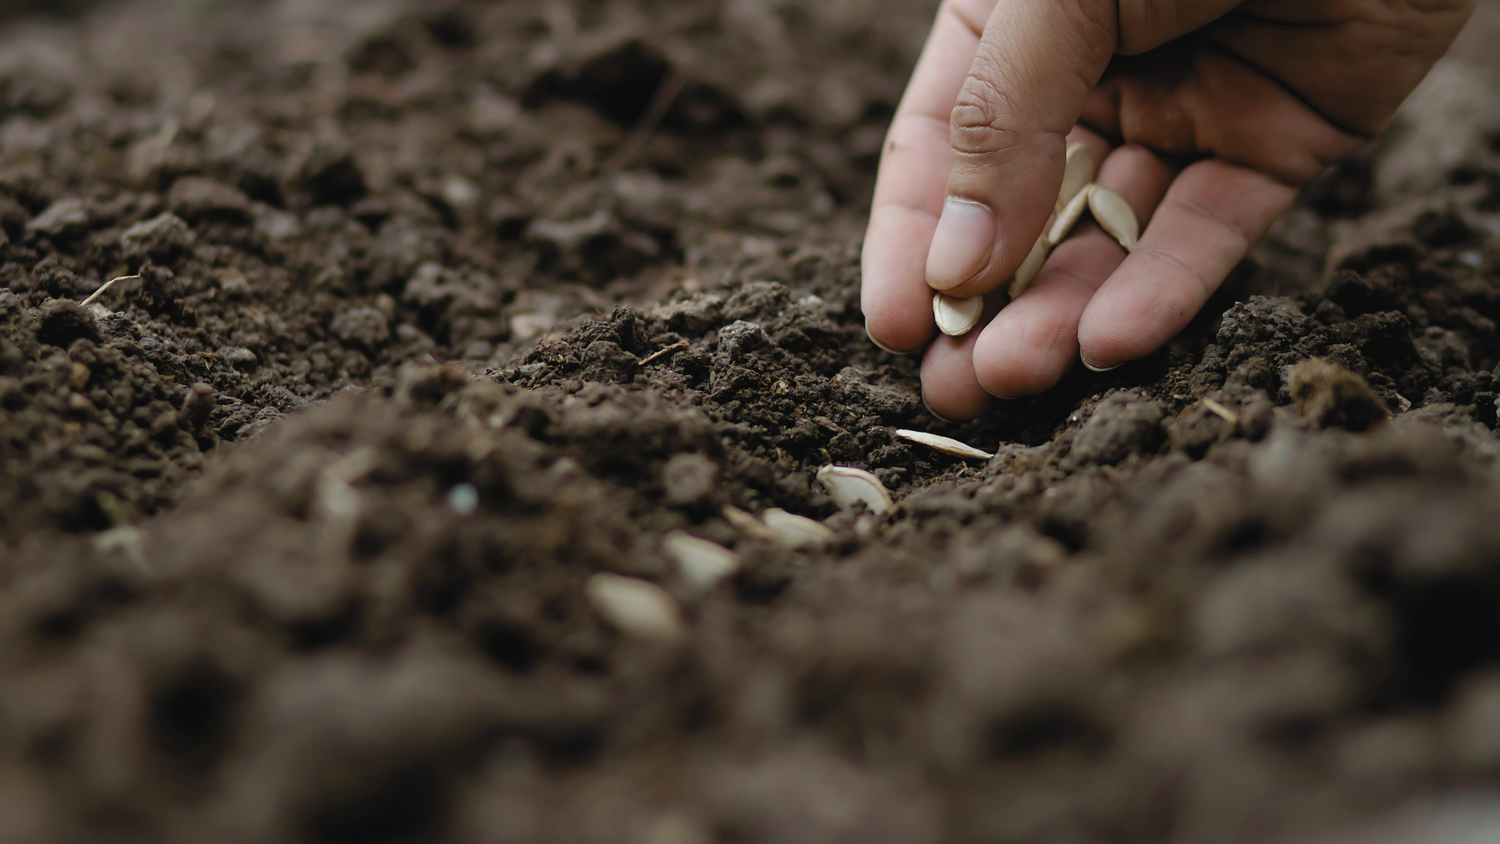 Planting Seeds: A Vision of Wellness, Connection, and Growth